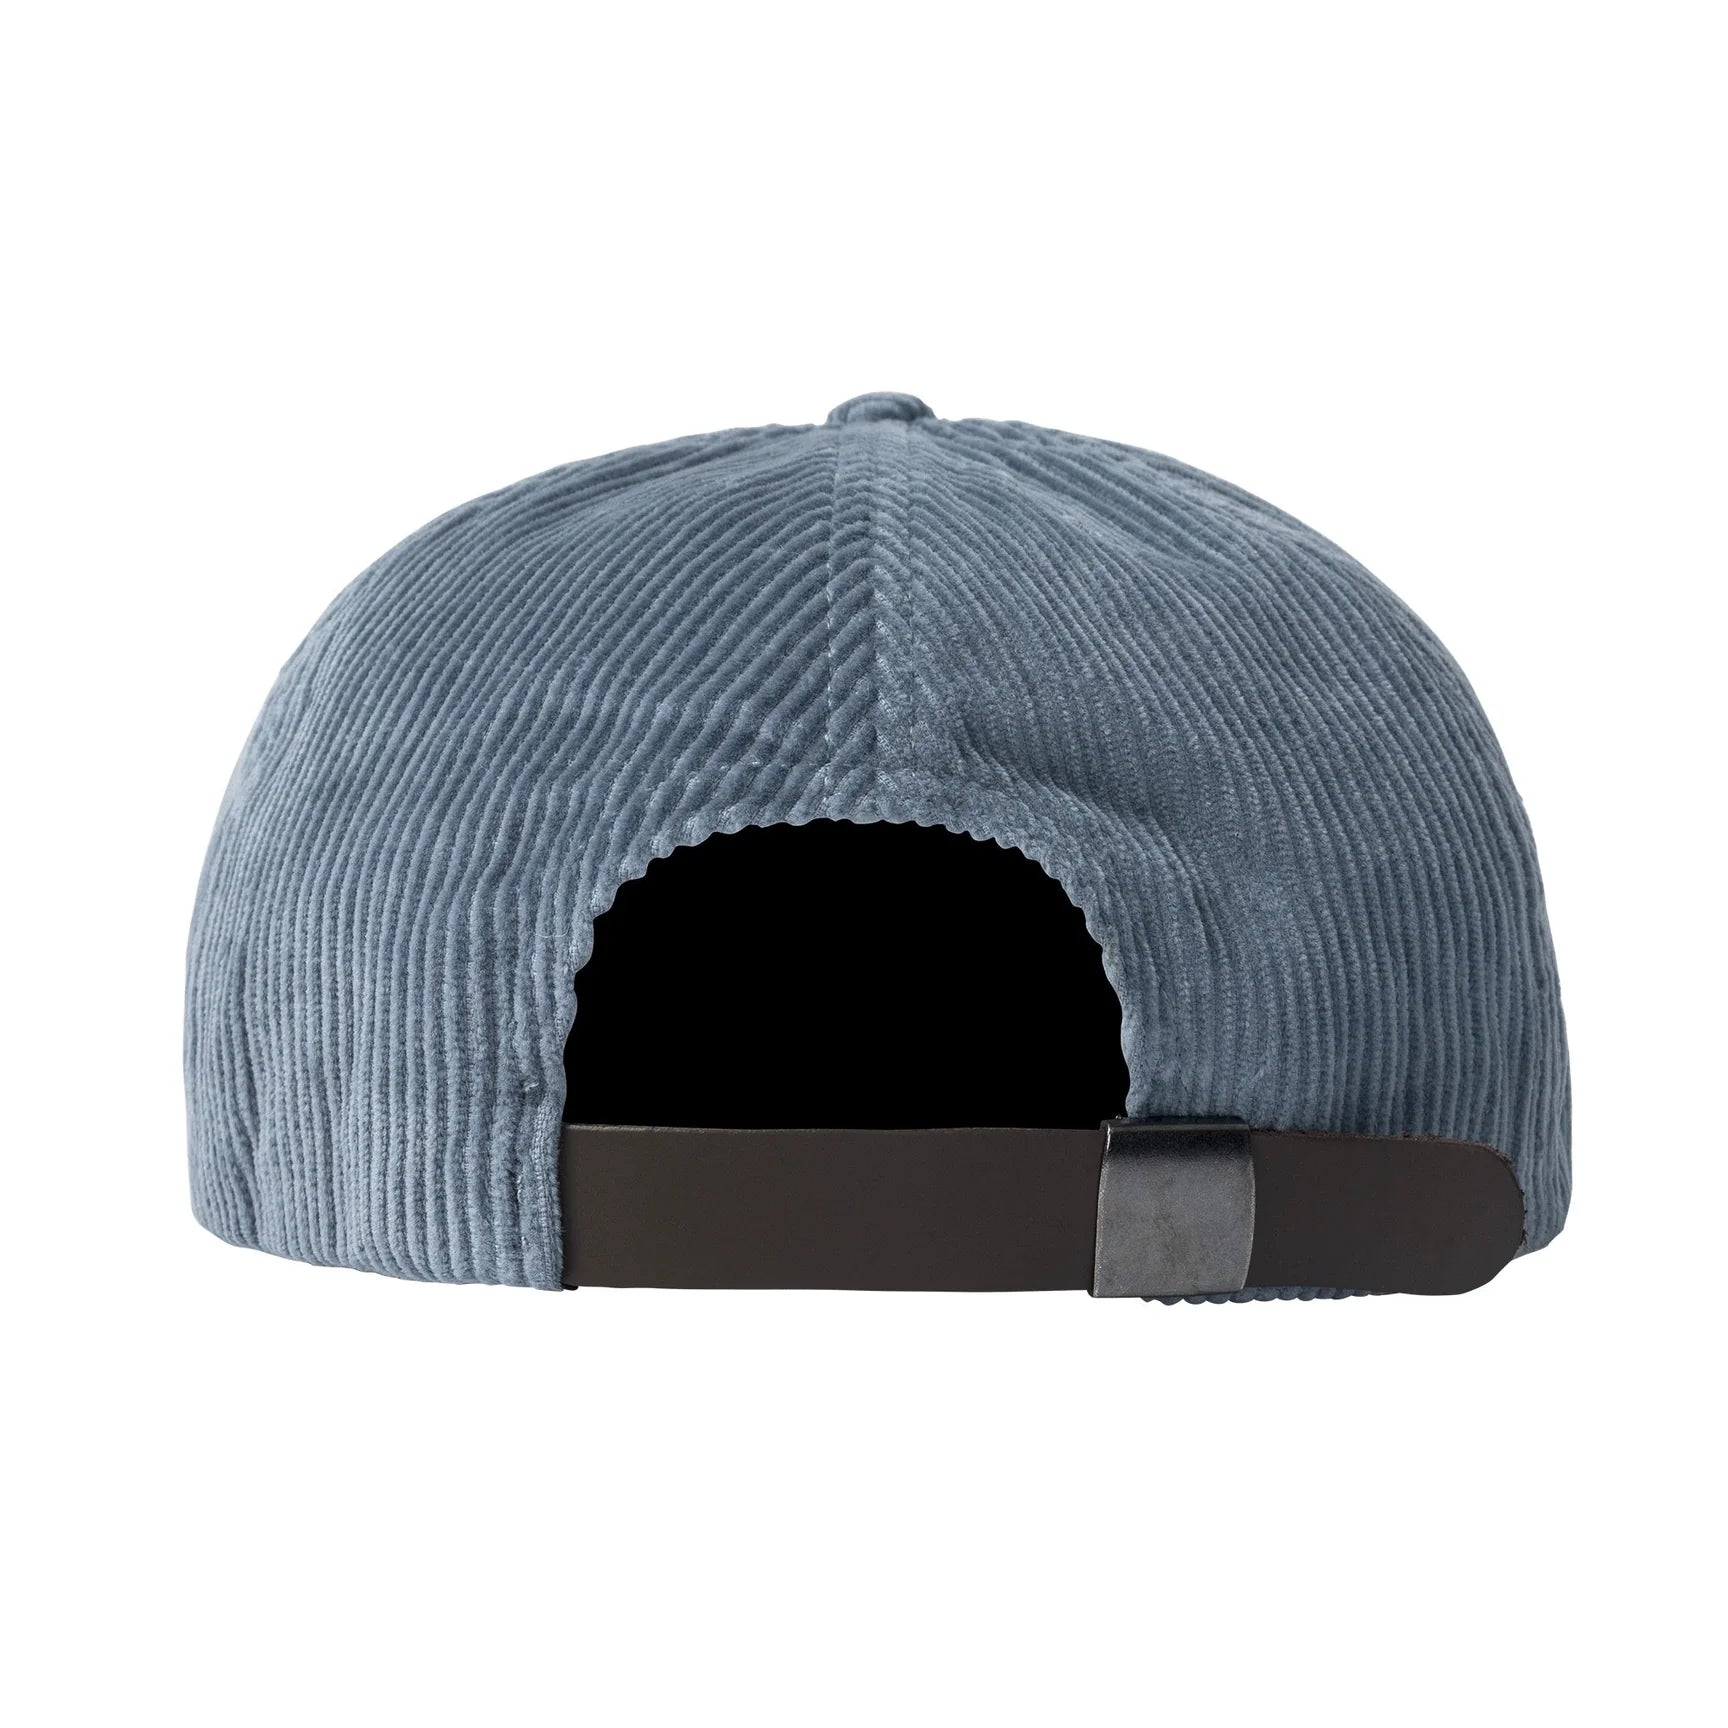 TIRED'S WASHED CORD CAP RAIN